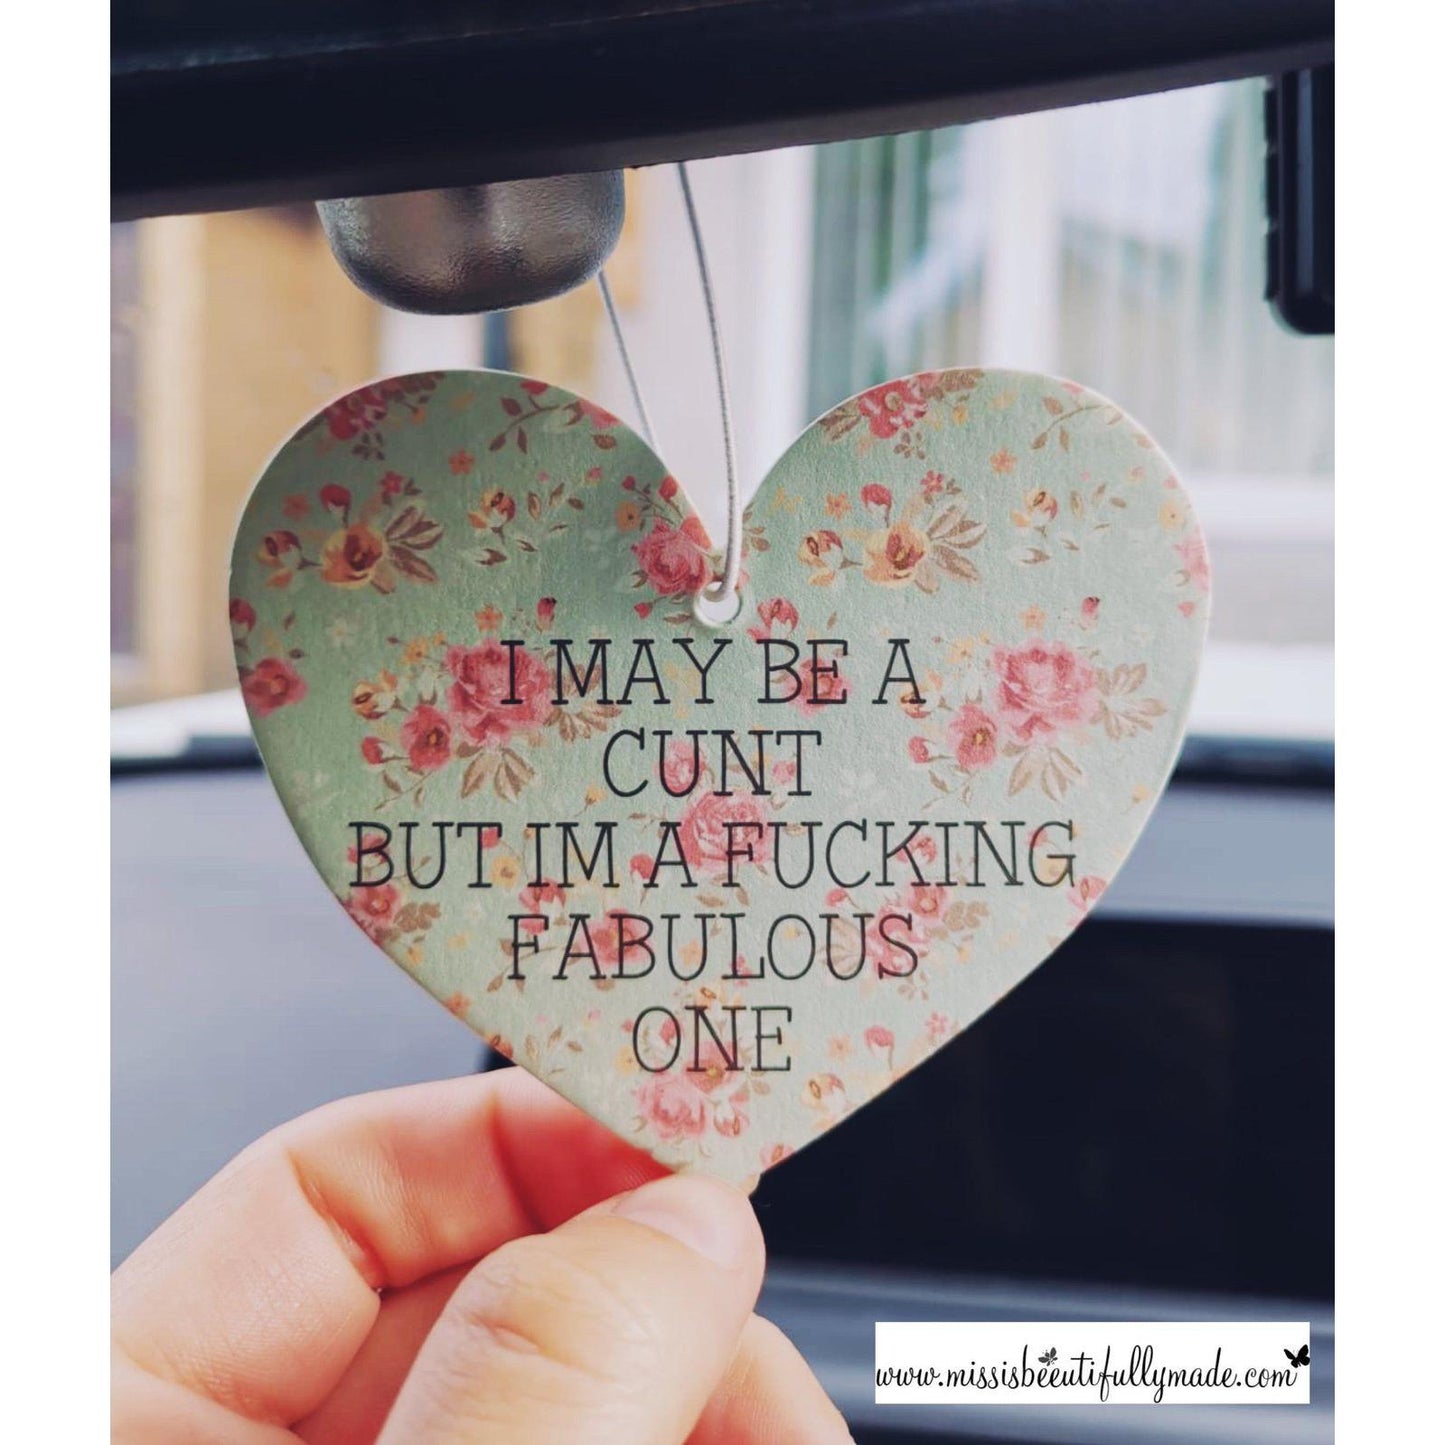 Unscented heart shape car freshener with a mint and pink floral design. Printed front & back with the quote 'I may be a cunt but i'm a fucking fabulous one'. Add your own scent